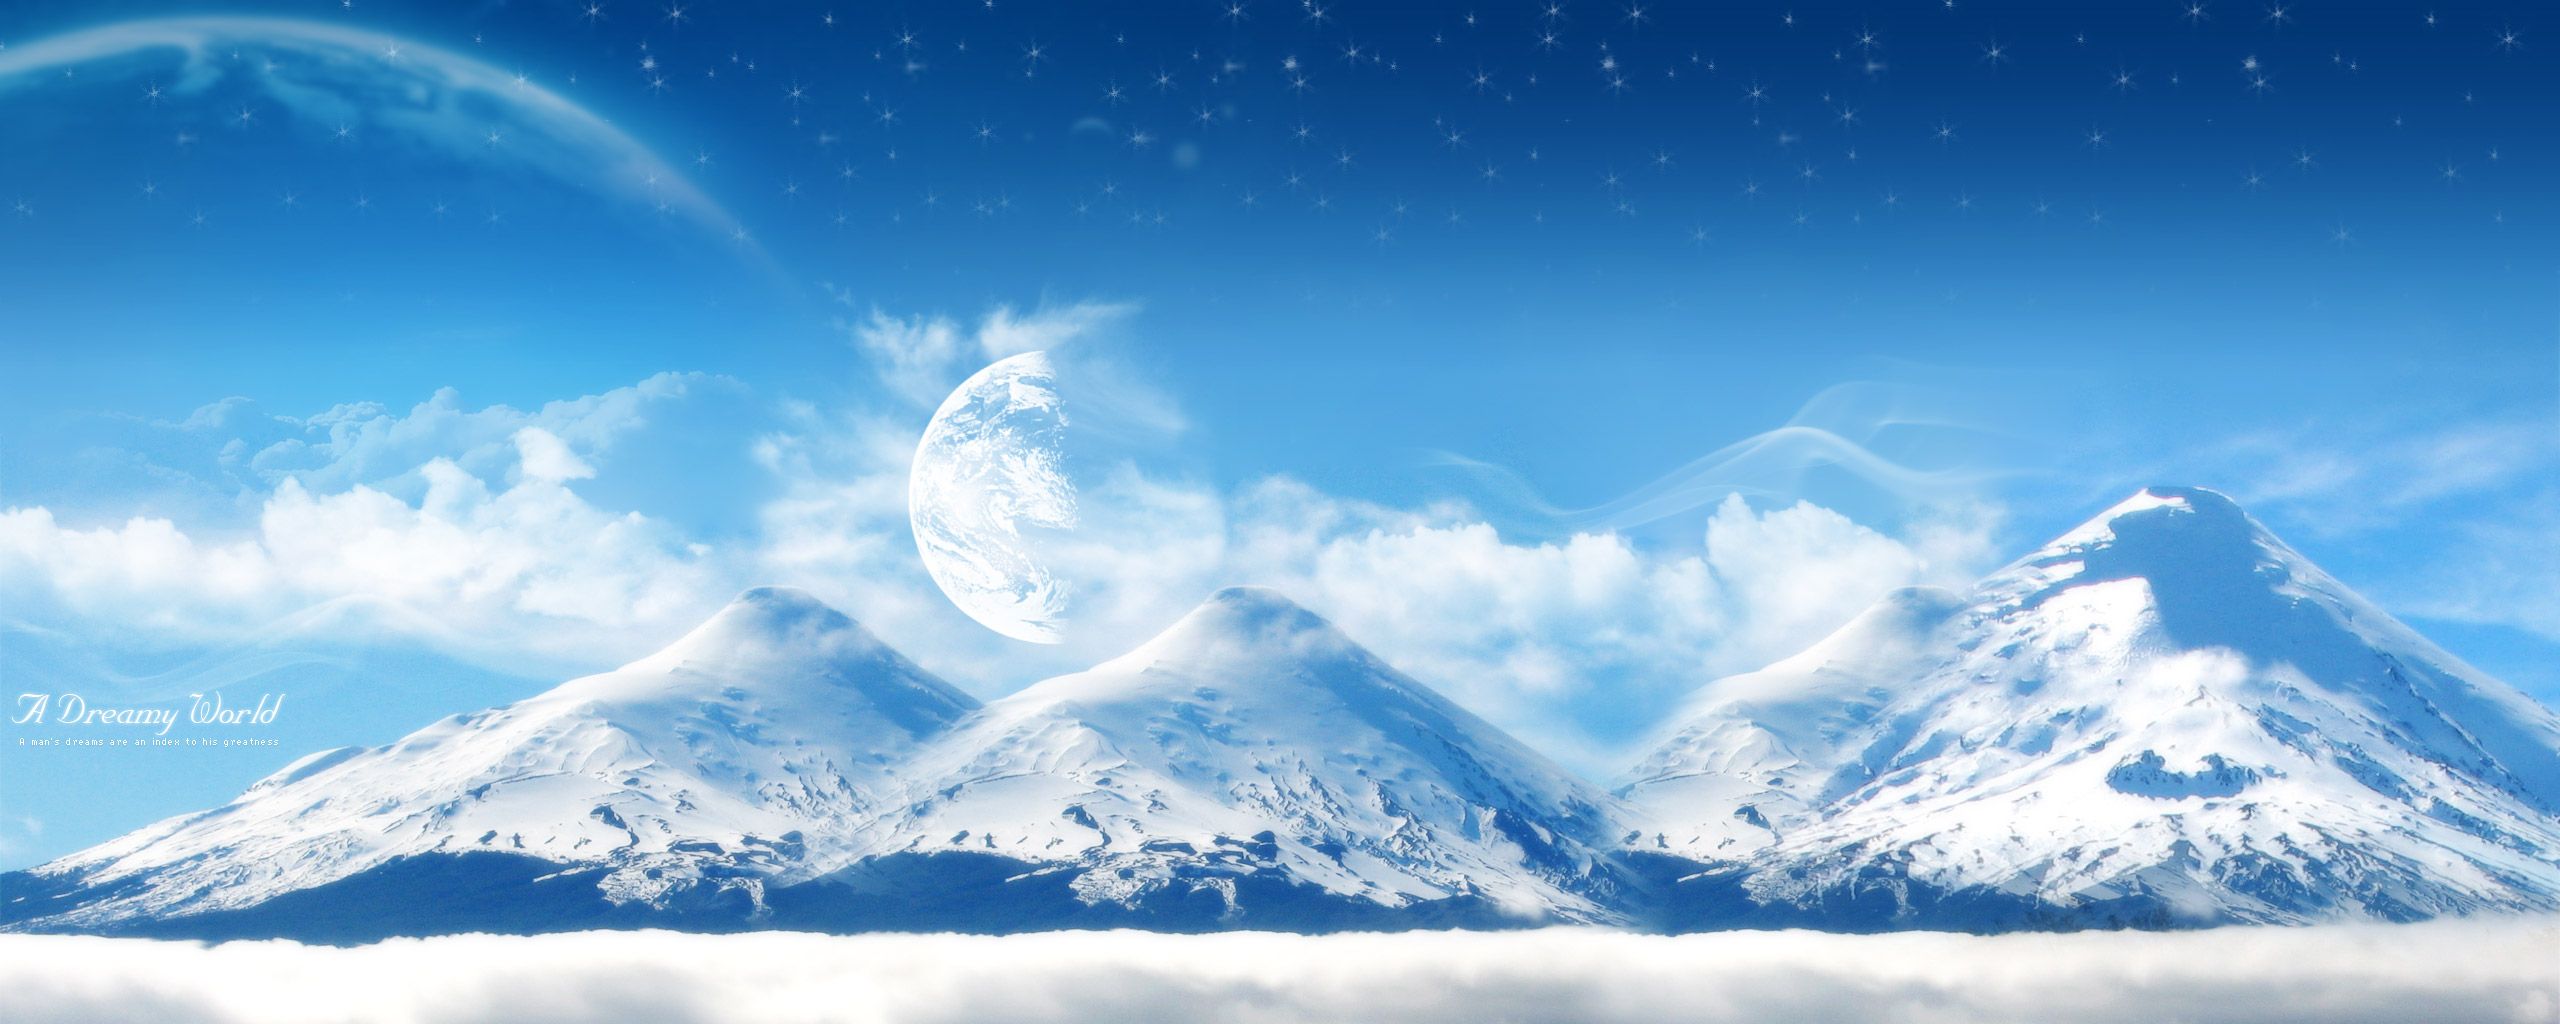 Thumbnail image for ~//images//Dual-Screen-A-Dreamy-World-Snowy-Mountain-2560x1024[1]_634256667305264470.jpg